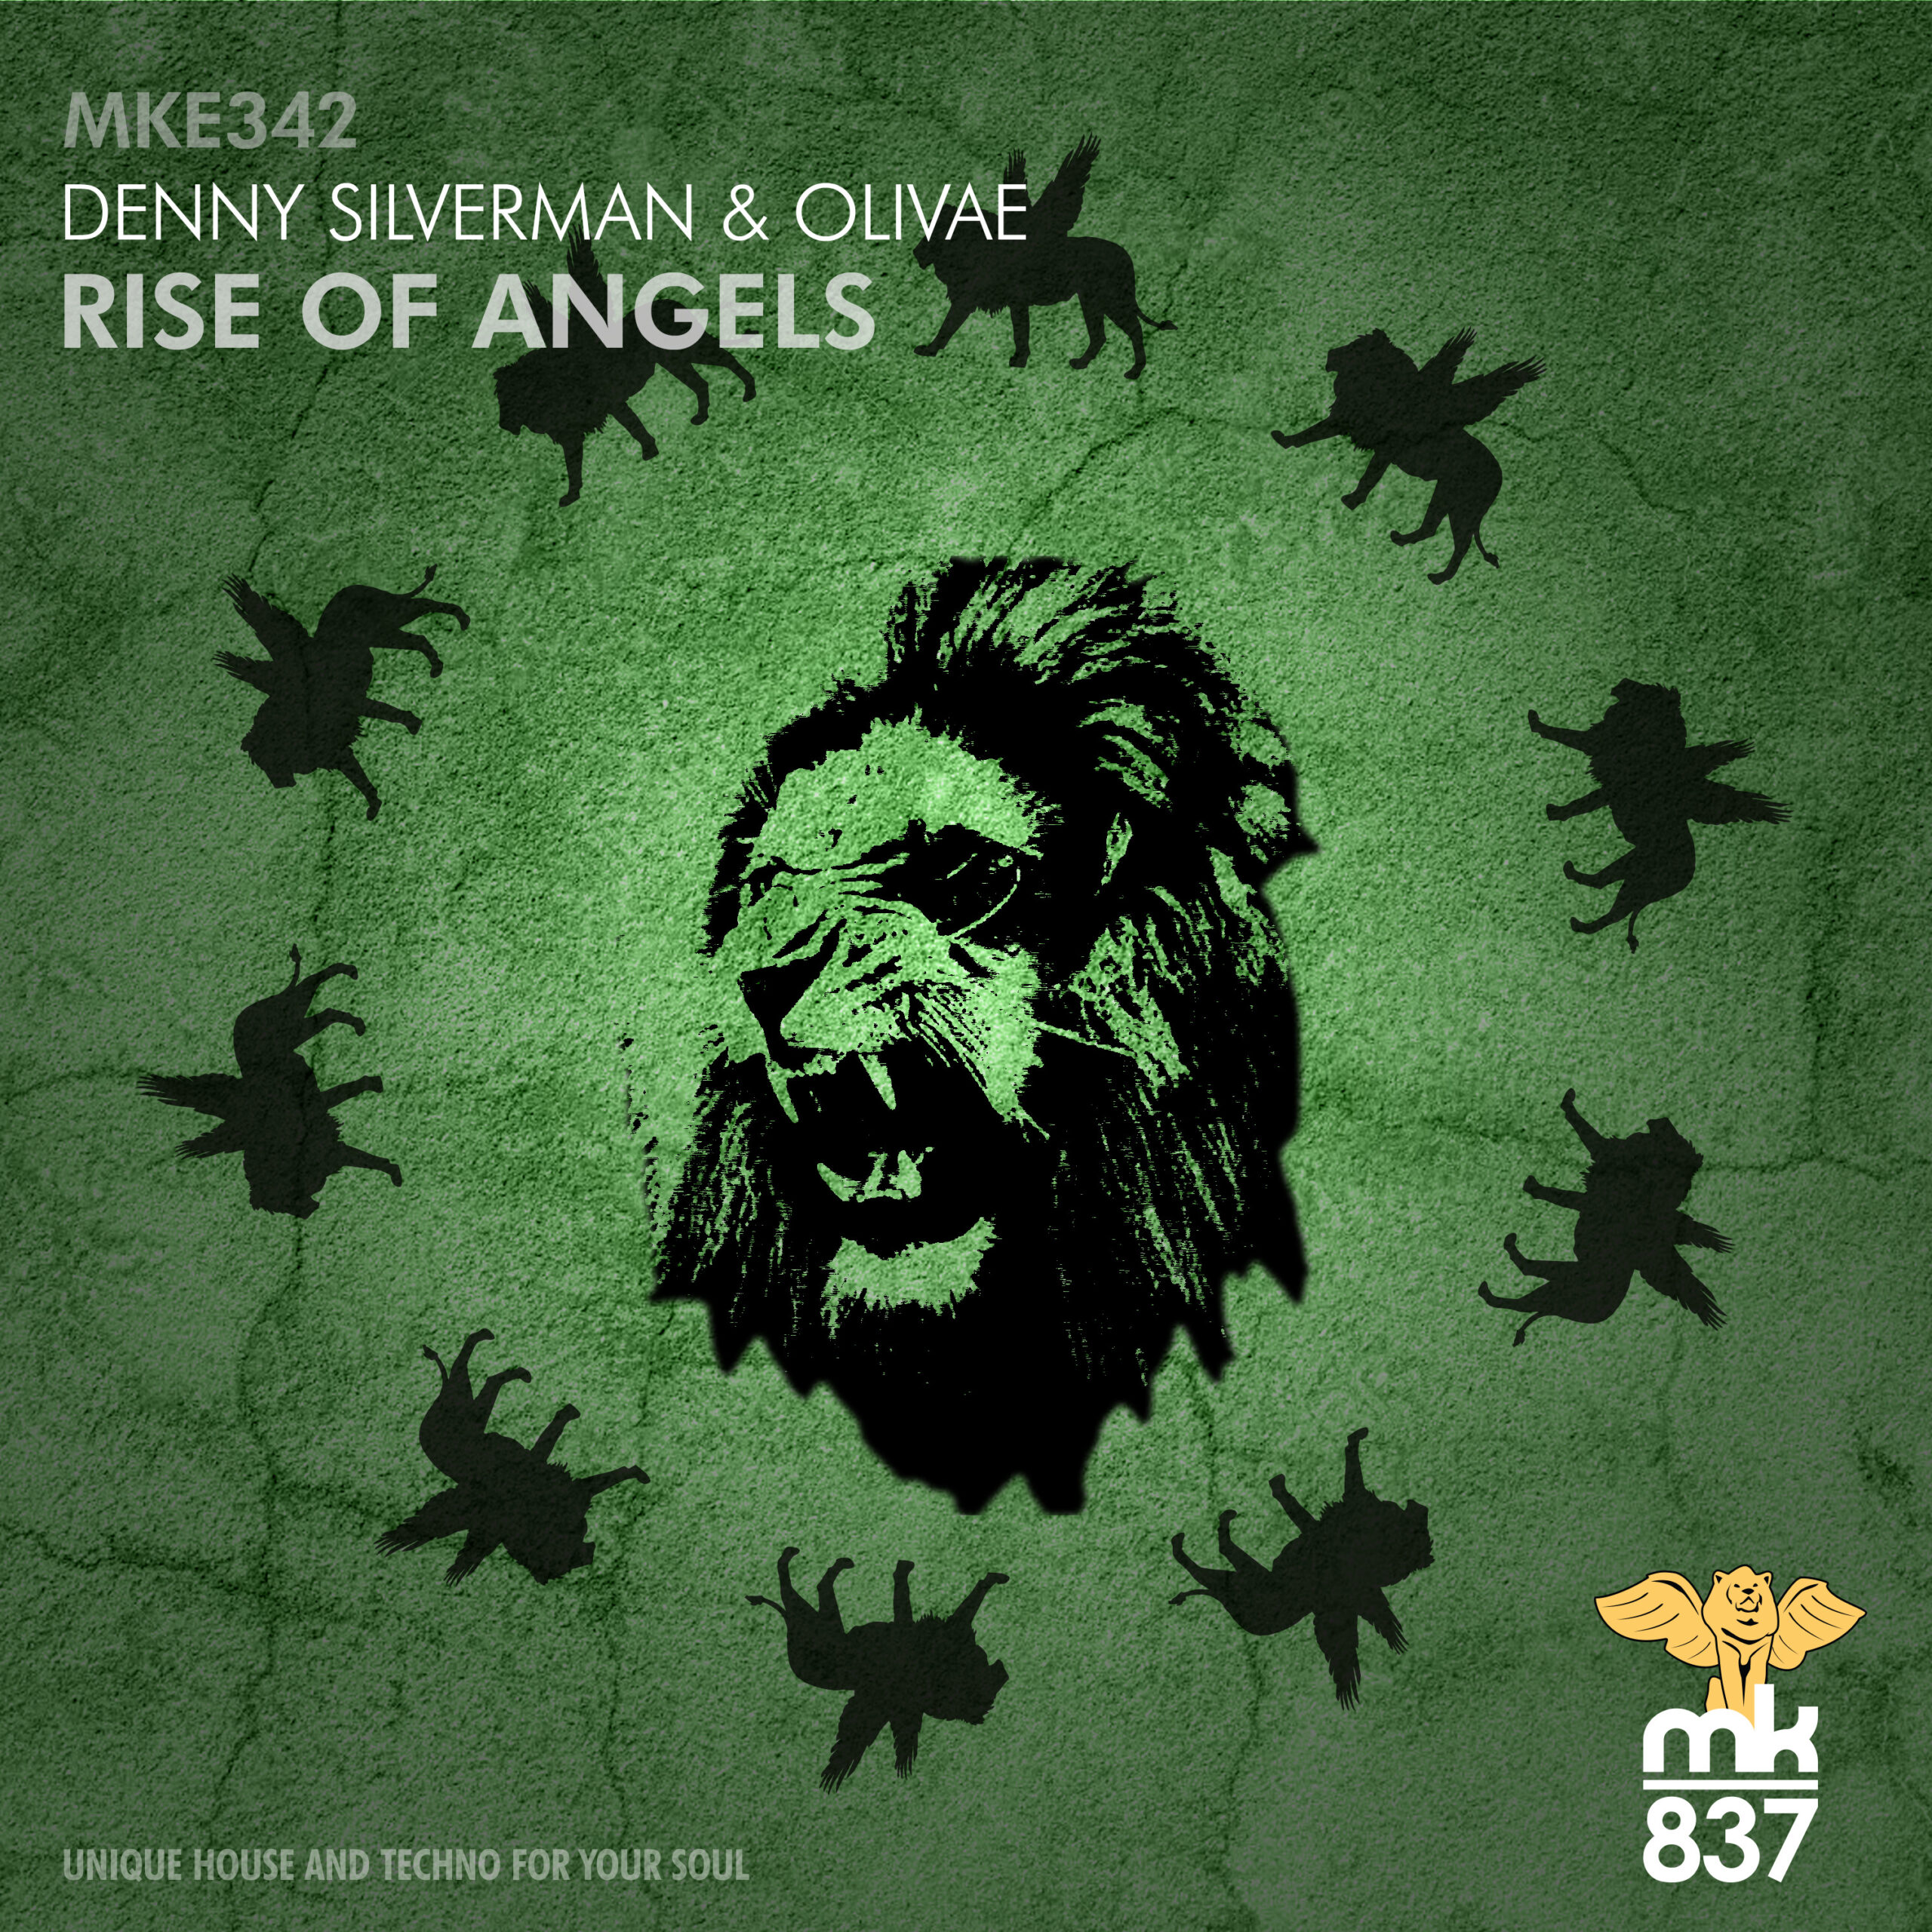 Denny Silverman & Olivae - Rise of Angels